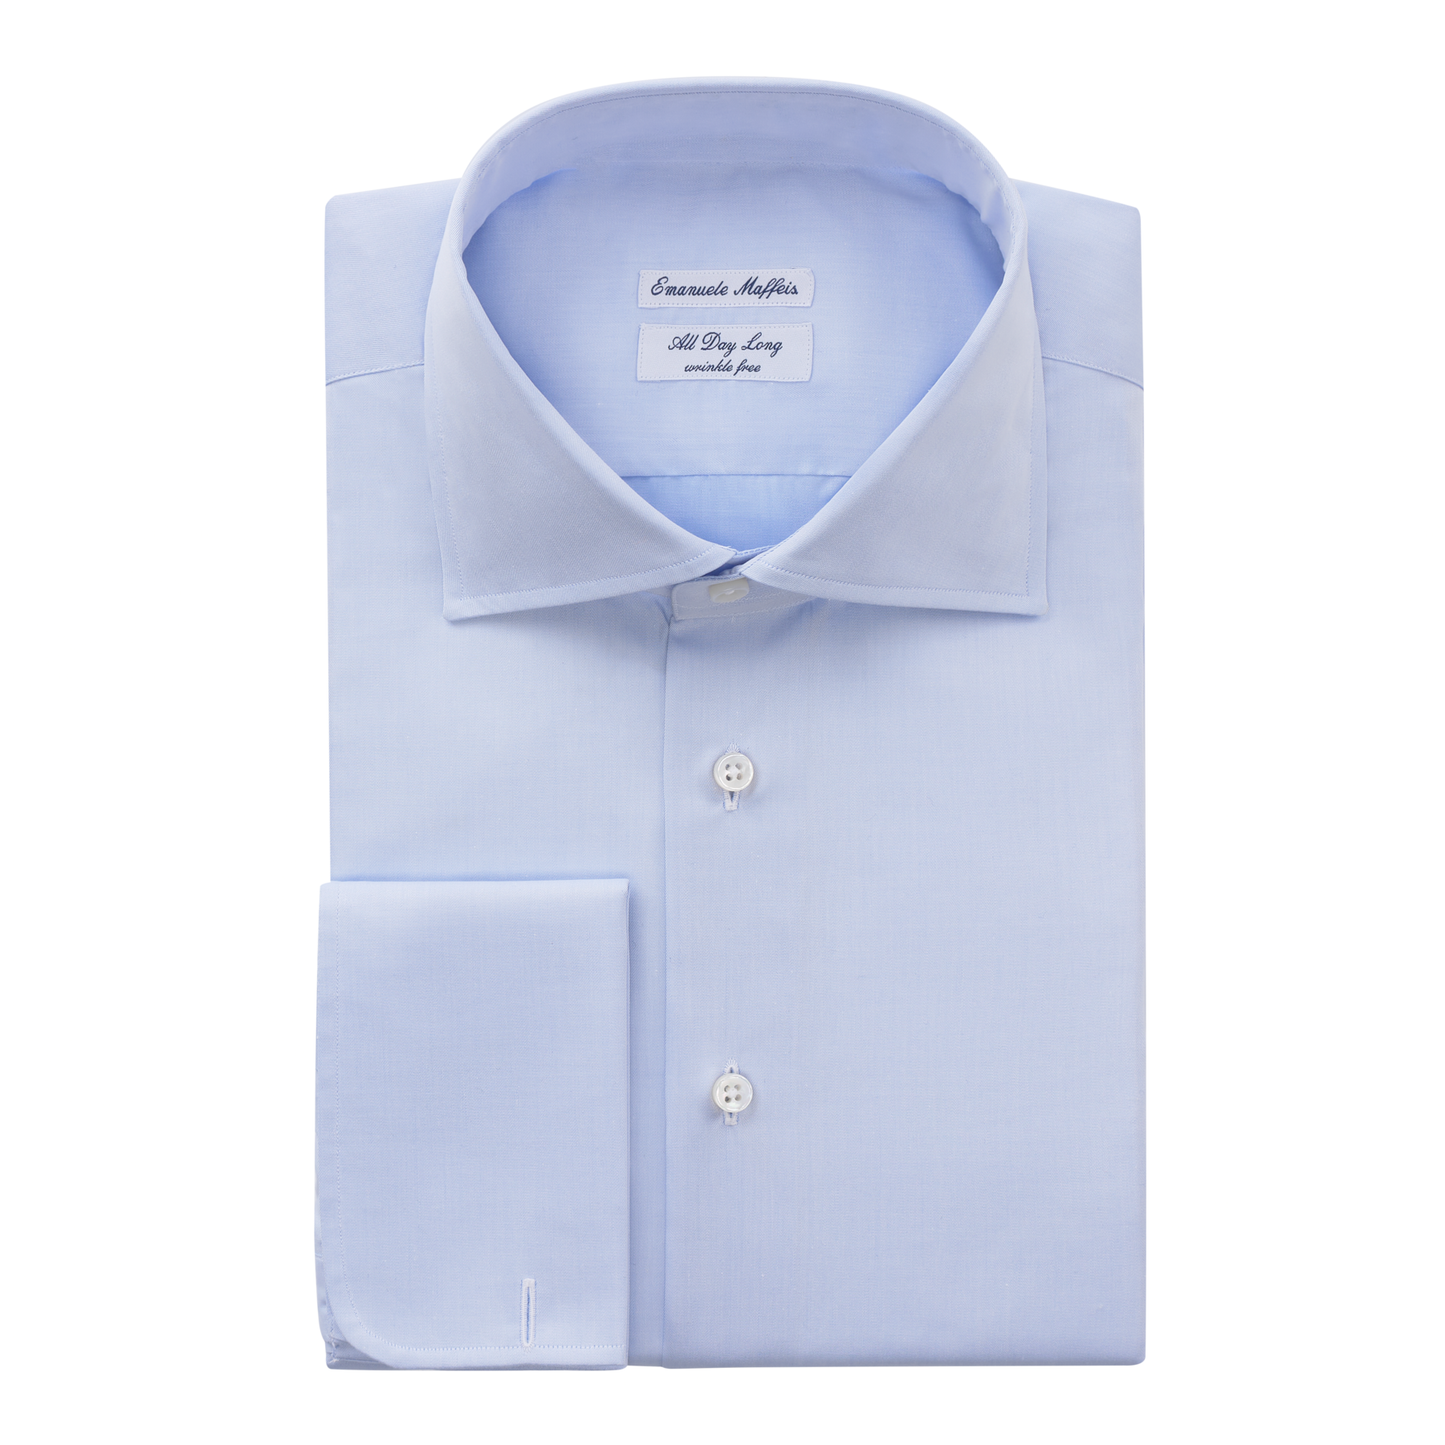 Emanuele Maffeis "All Day Long Collection" Cotton Light Blue Shirt with Classic Collar - SARTALE